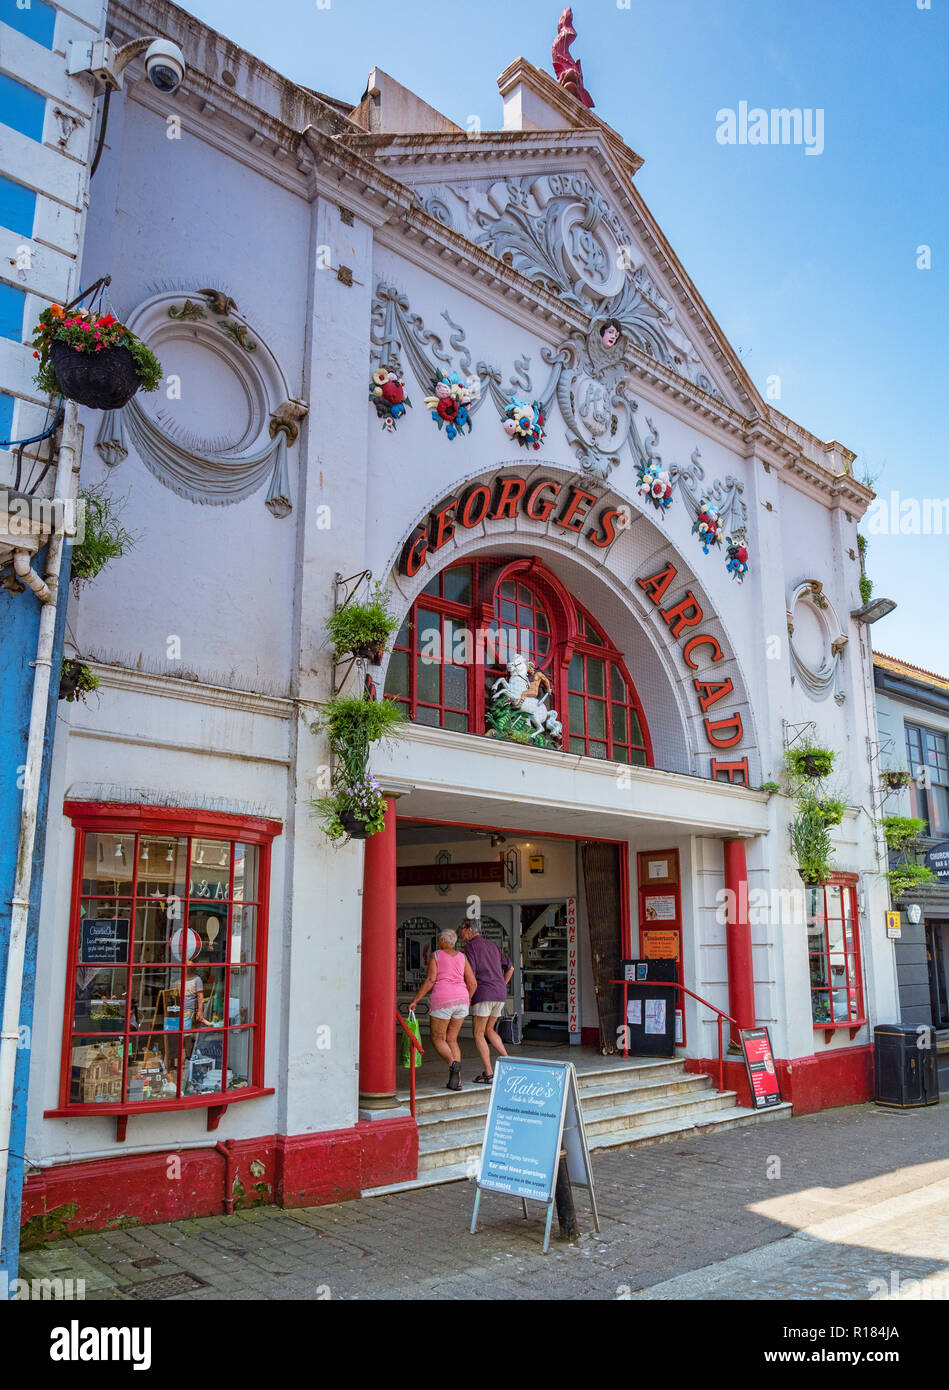 12 June 2018: Falmouth, Cornwall, UK - St George's Arcade, Church Street, built in 1912 and originally a cinema,  now houses shops. Stock Photo